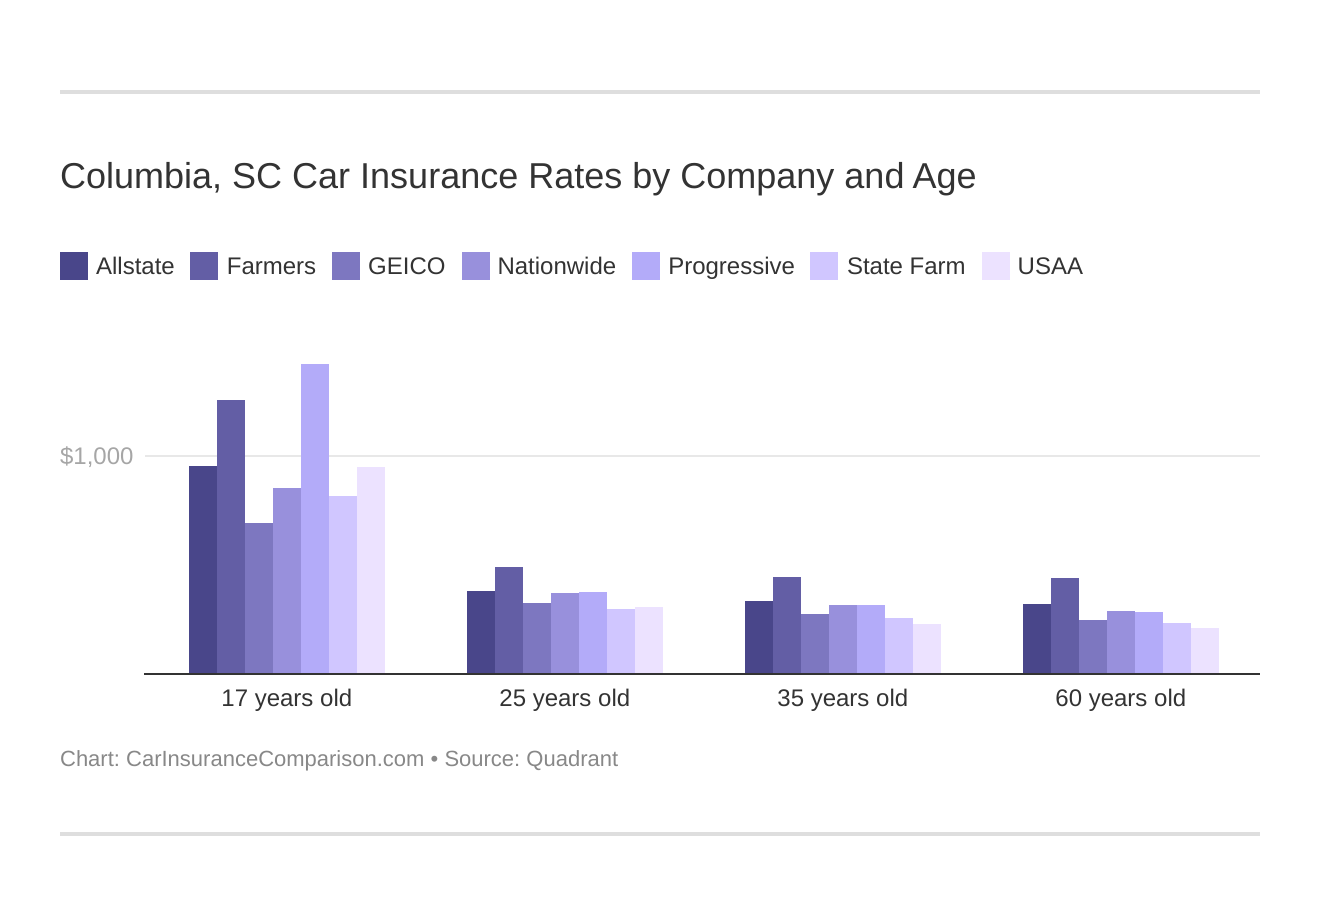 Columbia, SC Car Insurance Rates by Company and Age